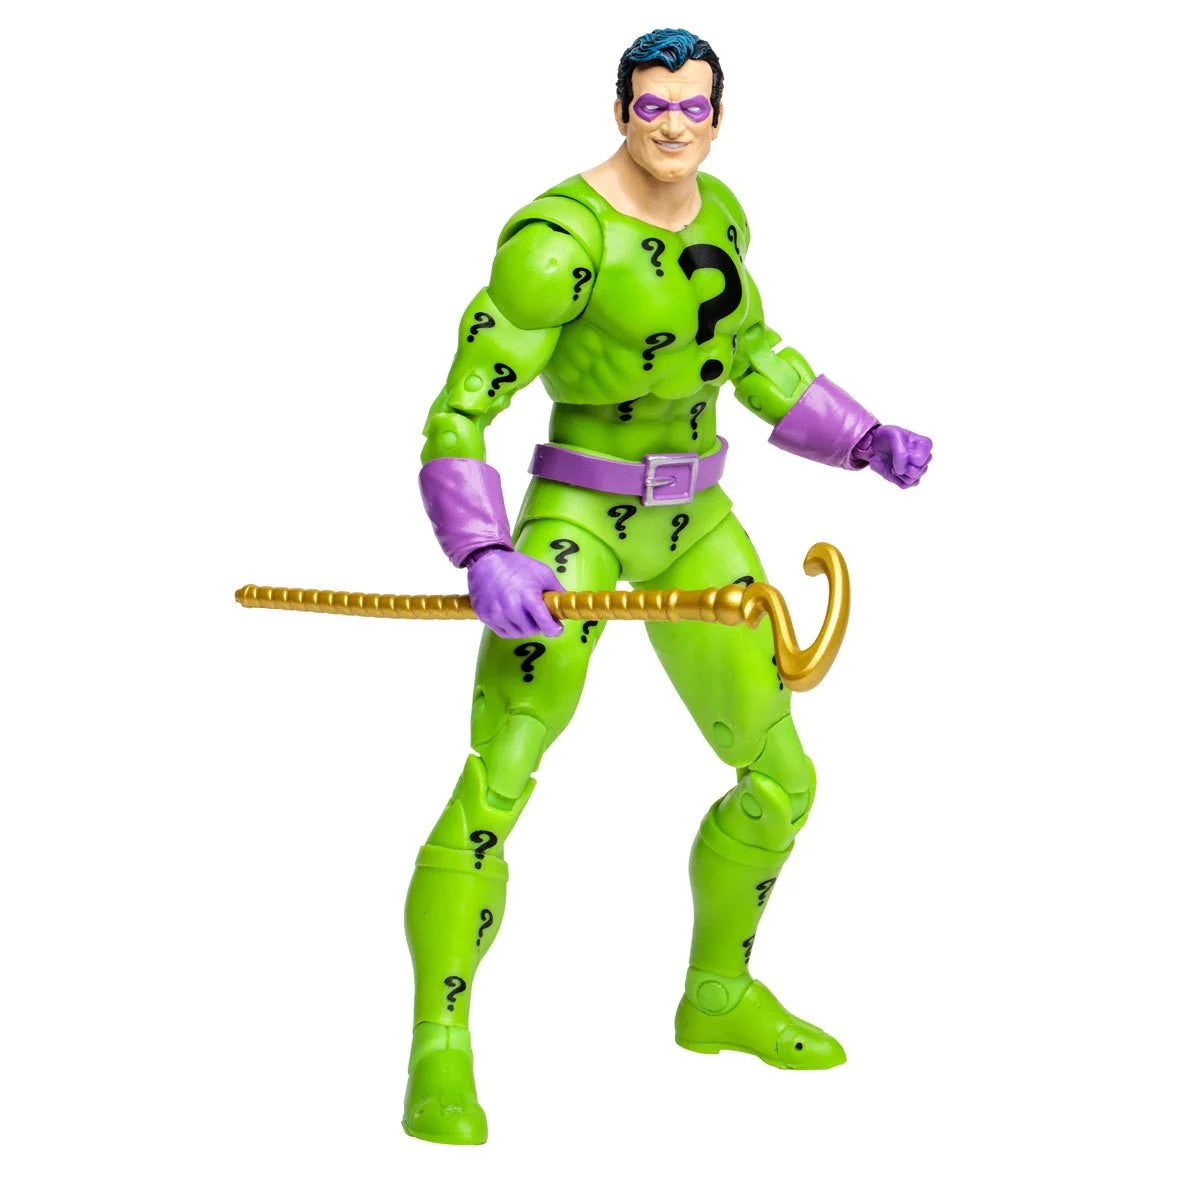 The Classic Riddler Action Figure in a pose - heretoserveyou